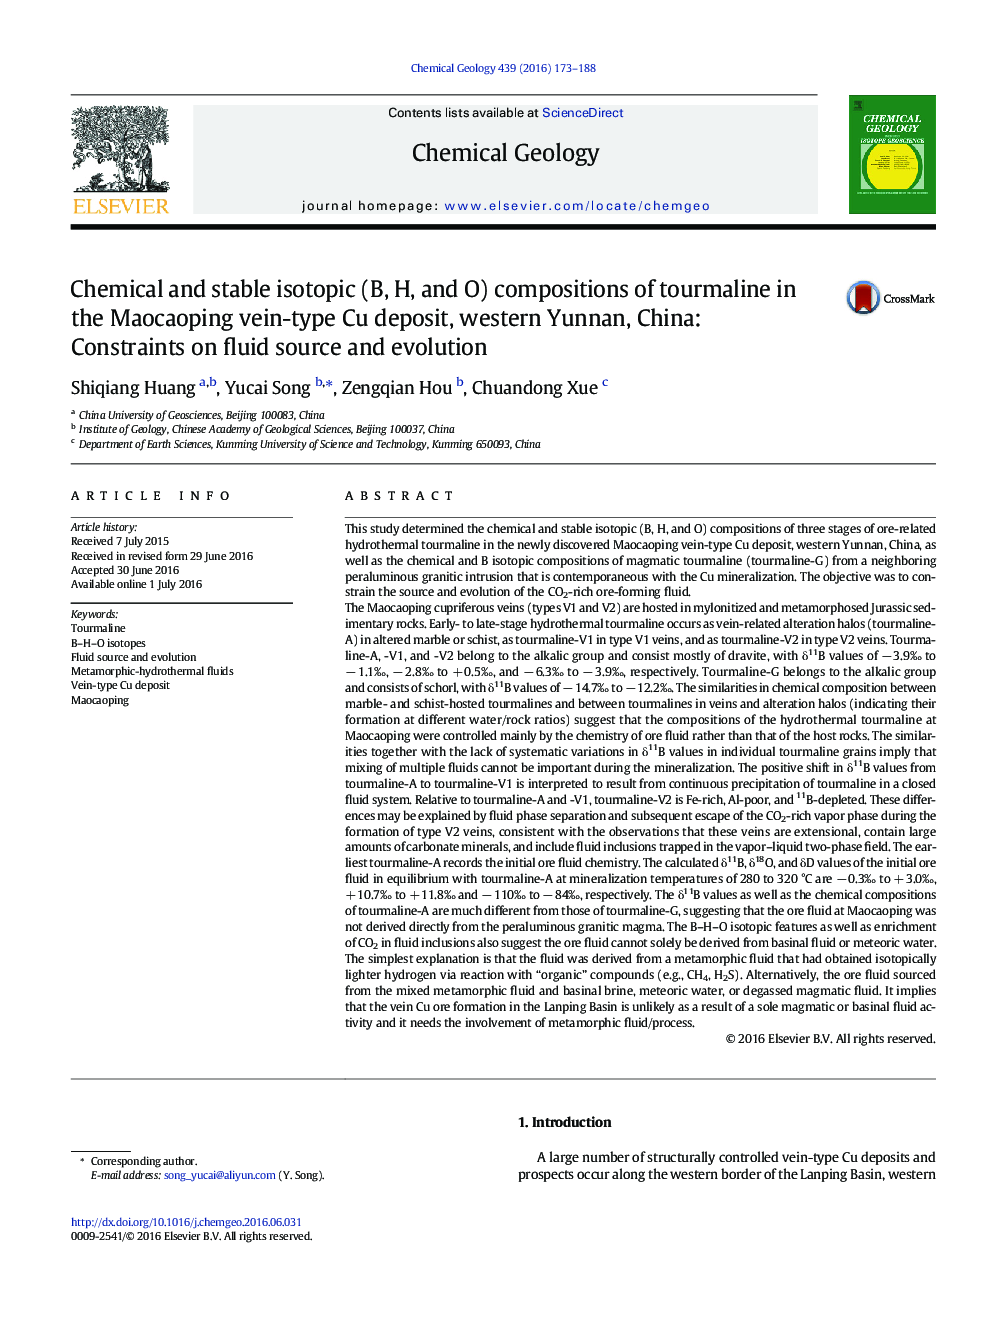 Chemical and stable isotopic (B, H, and O) compositions of tourmaline in the Maocaoping vein-type Cu deposit, western Yunnan, China: Constraints on fluid source and evolution